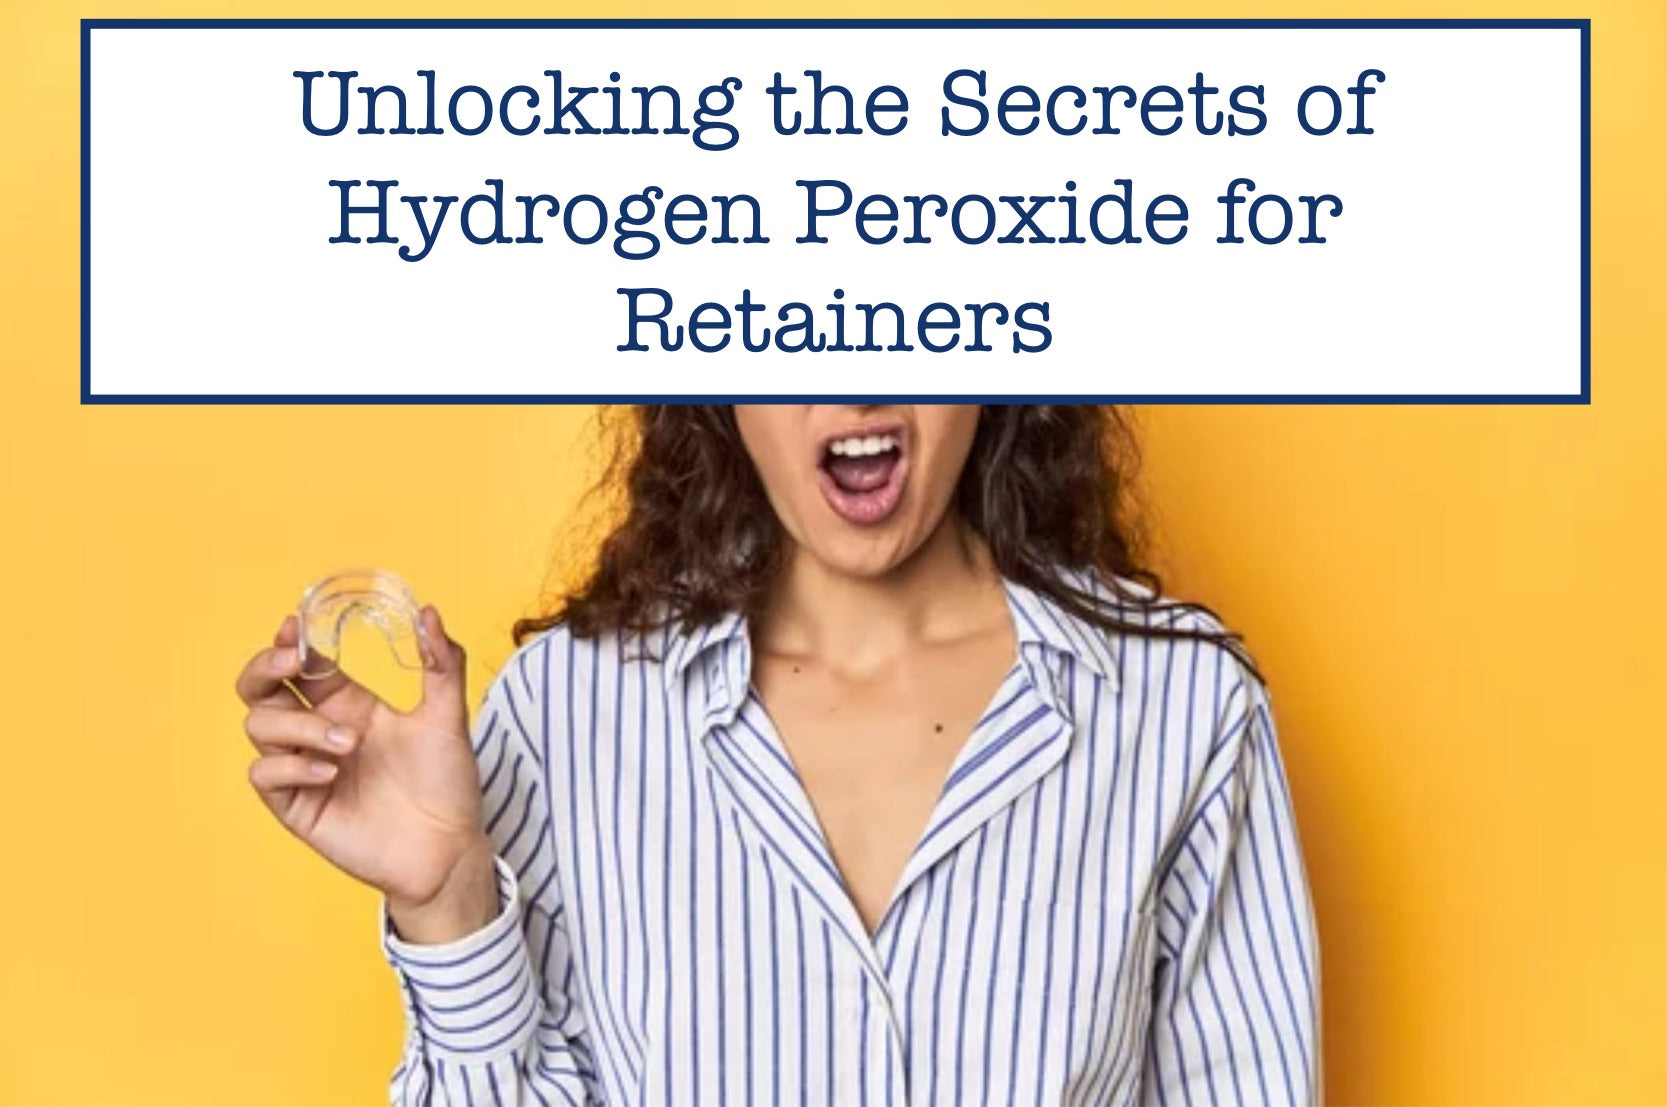 Unlocking the Secrets of Hydrogen Peroxide for Retainers